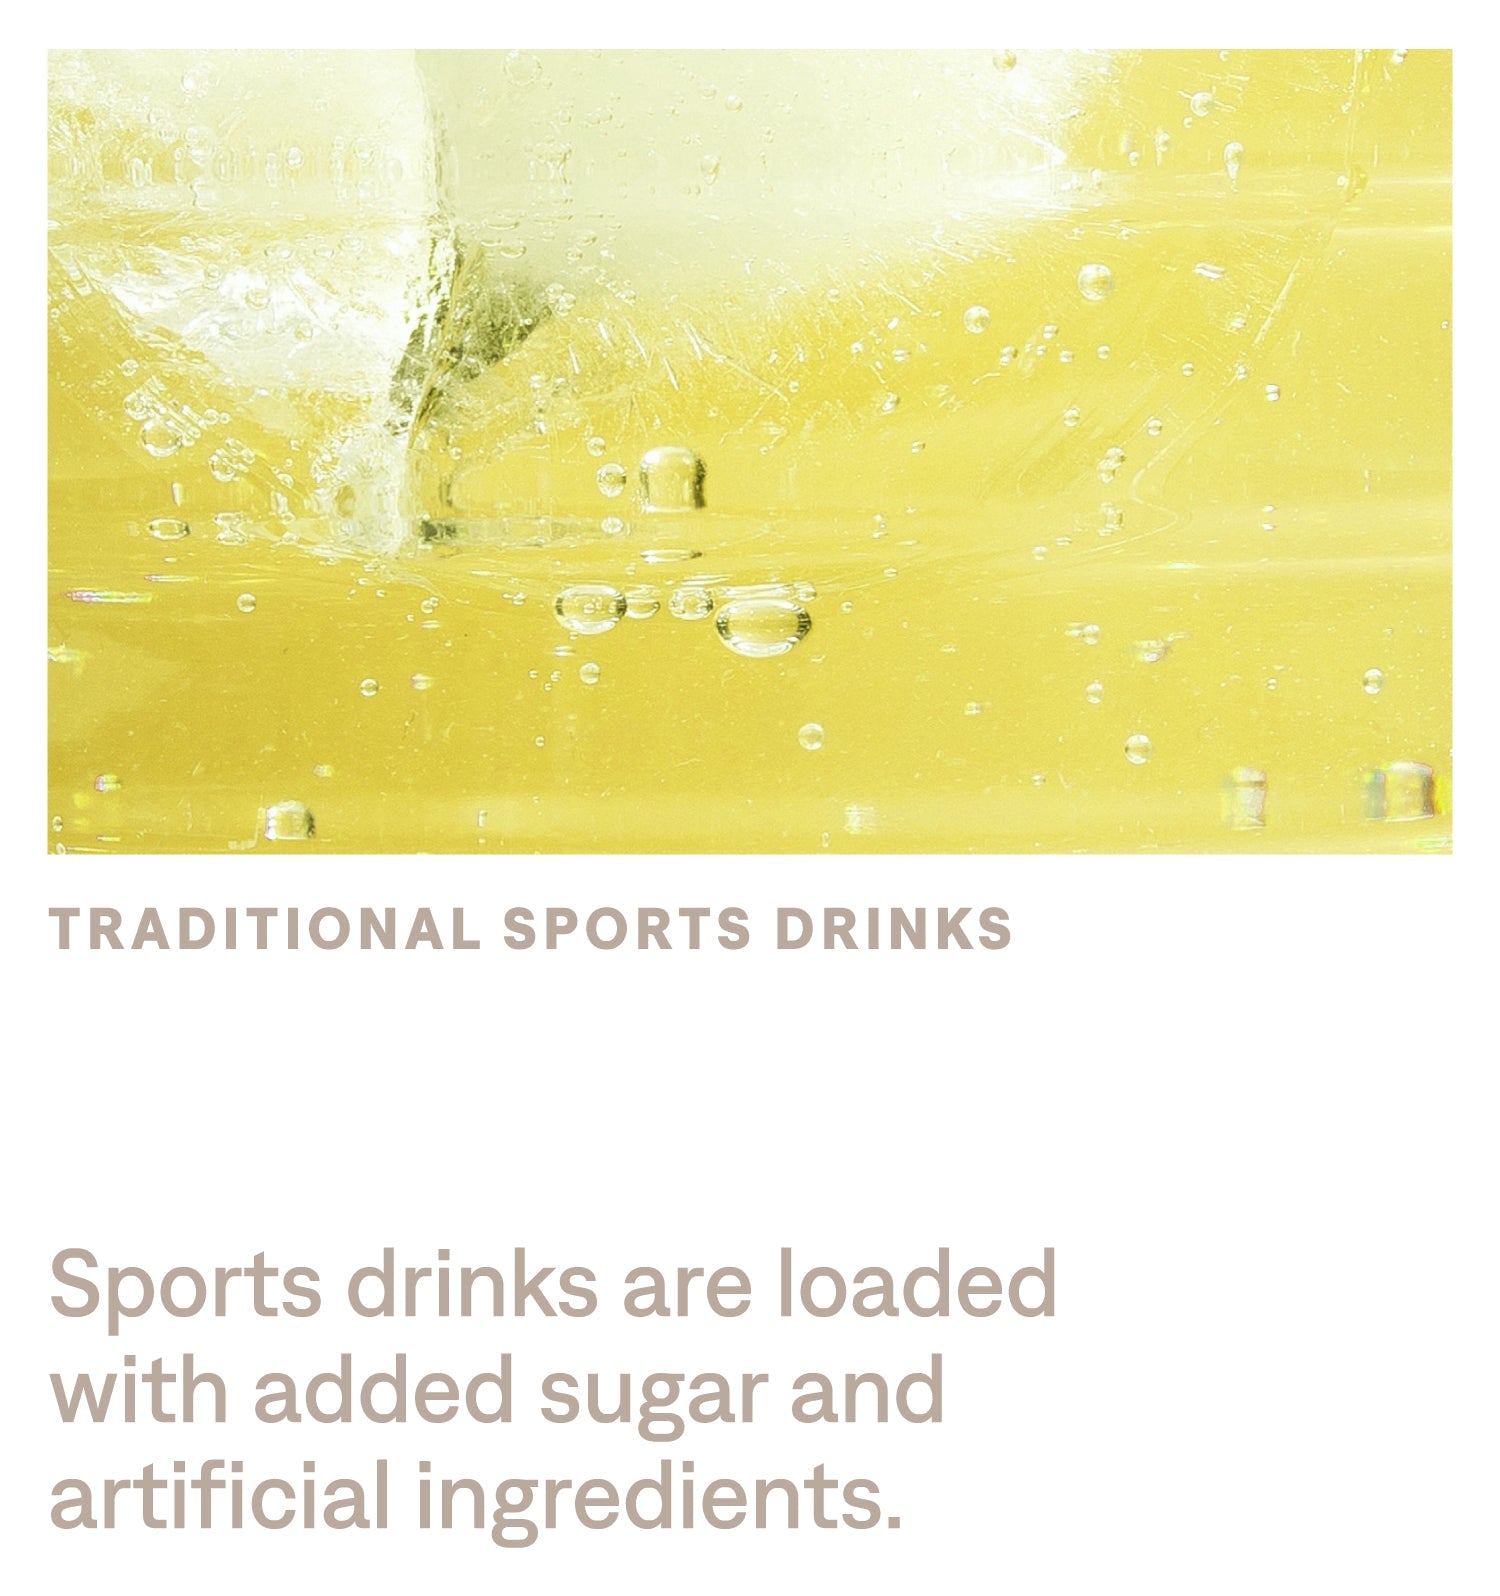 Sports drinks are loaded with added sugar and artificial ingredients.